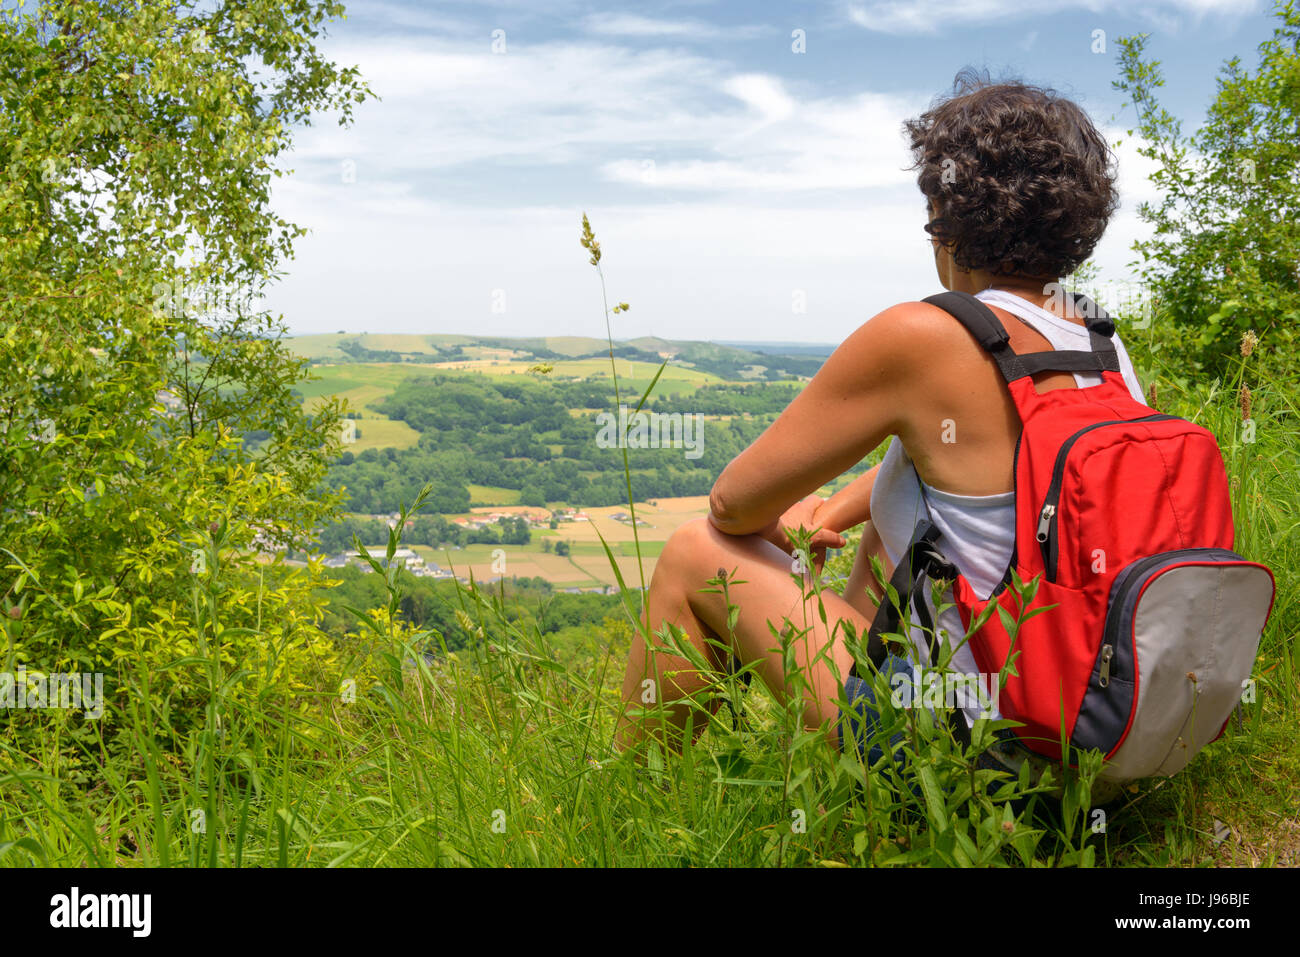 pretty mature woman go hiking in the mountains Stock Photo